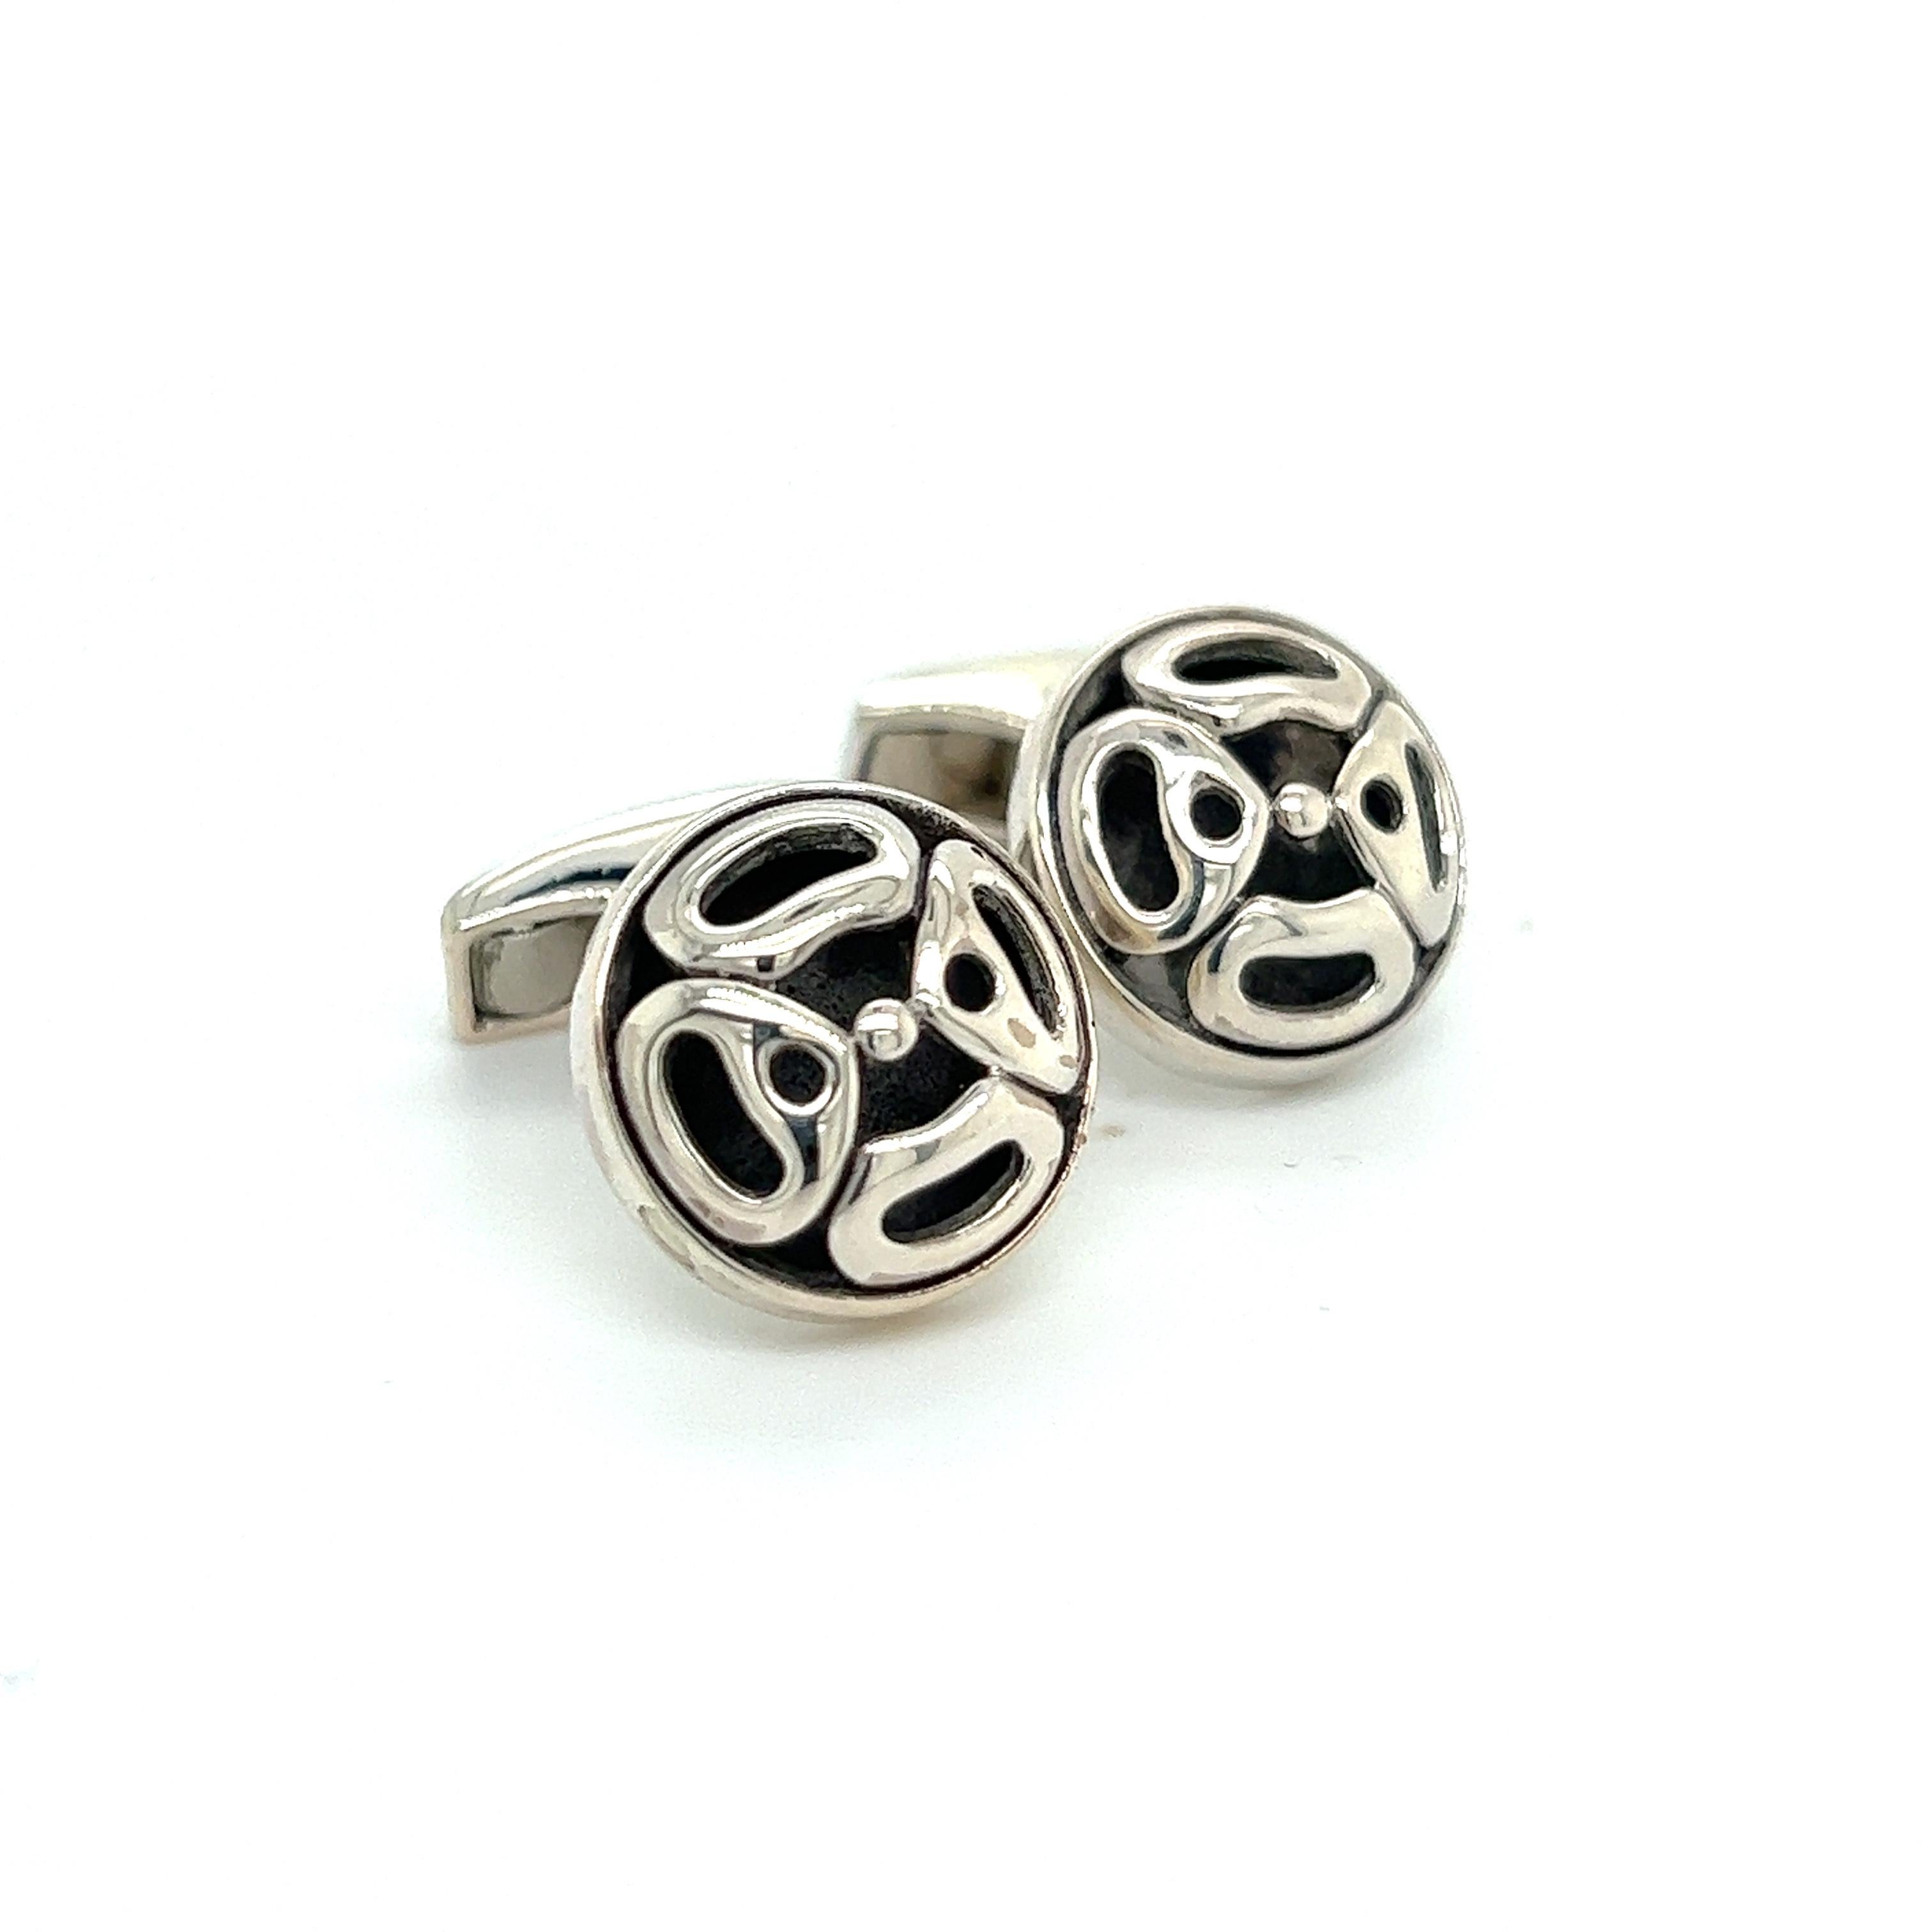 John Hardy Estate Mens Cufflinks Silver JH52

TRUSTED SELLER SINCE 2002

PLEASE SEE OUR HUNDREDS OF POSITIVE FEEDBACKS FROM OUR CLIENTS!!

FREE SHIPPING!!

DETAILS
Weight: 10 Grams
Metal: Sterling Silver

The John Hardy jewelry items are estate